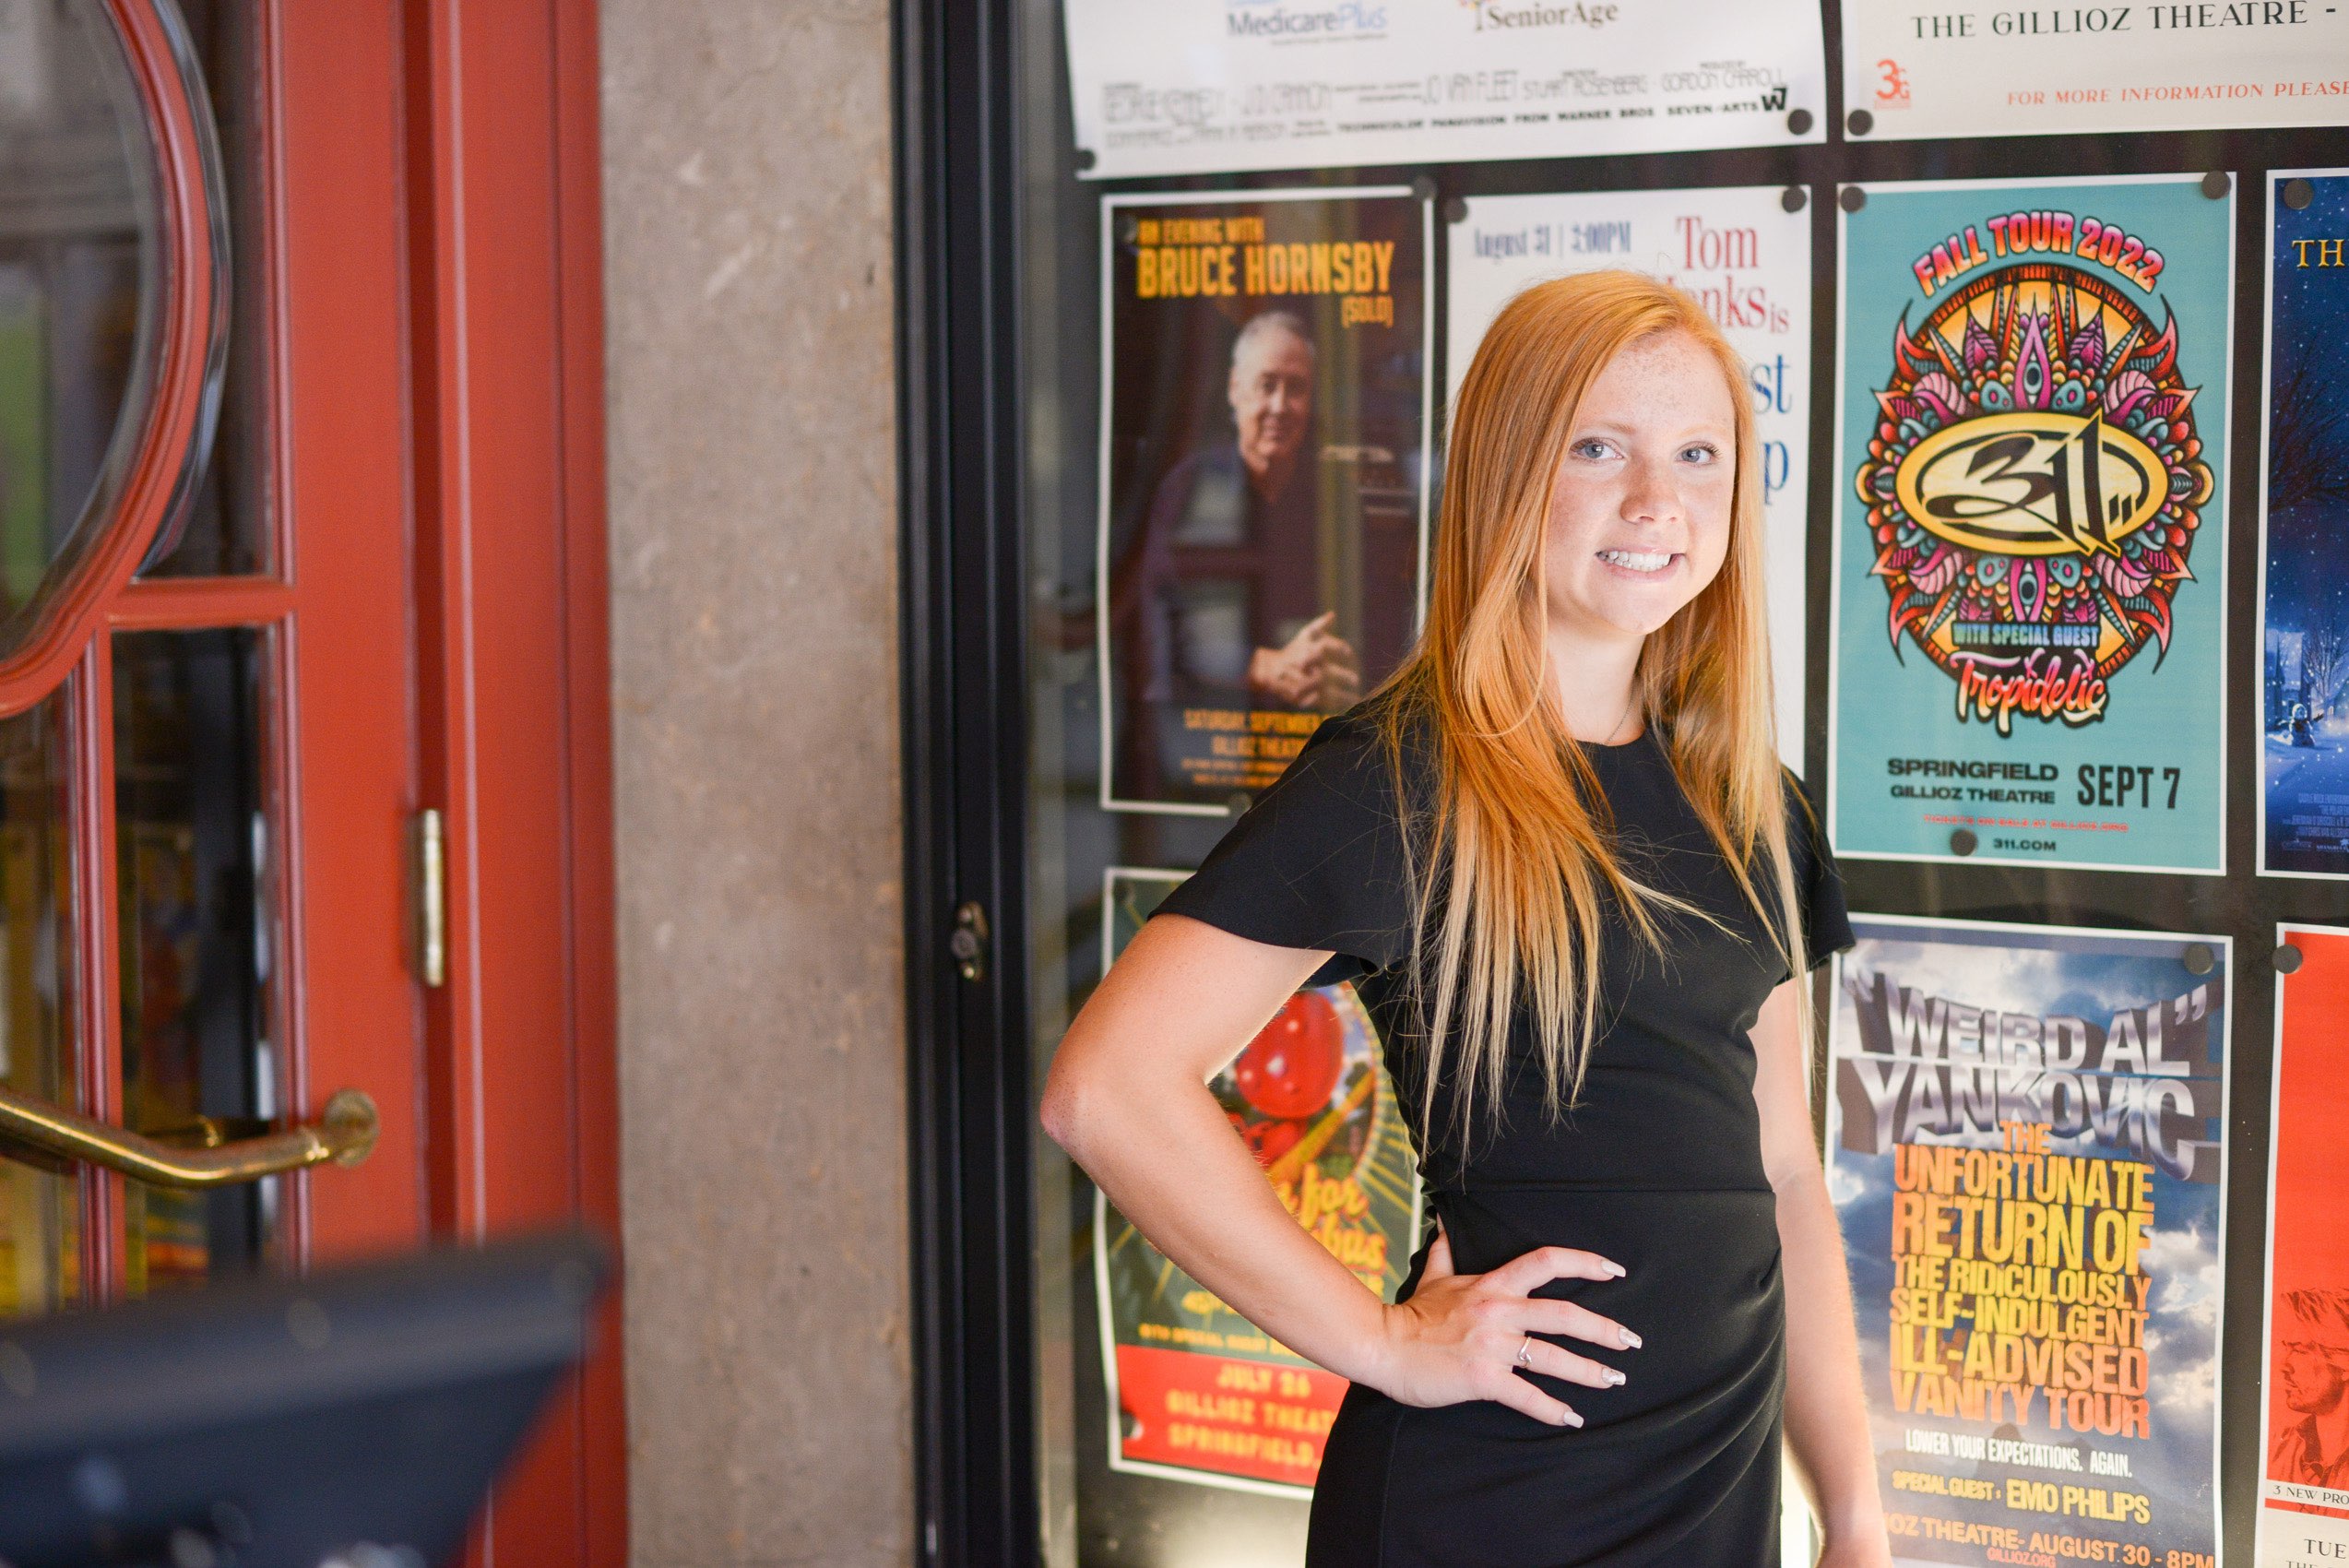 Senior portraits at the Gilloiz Theatre in front of colorful show posters.